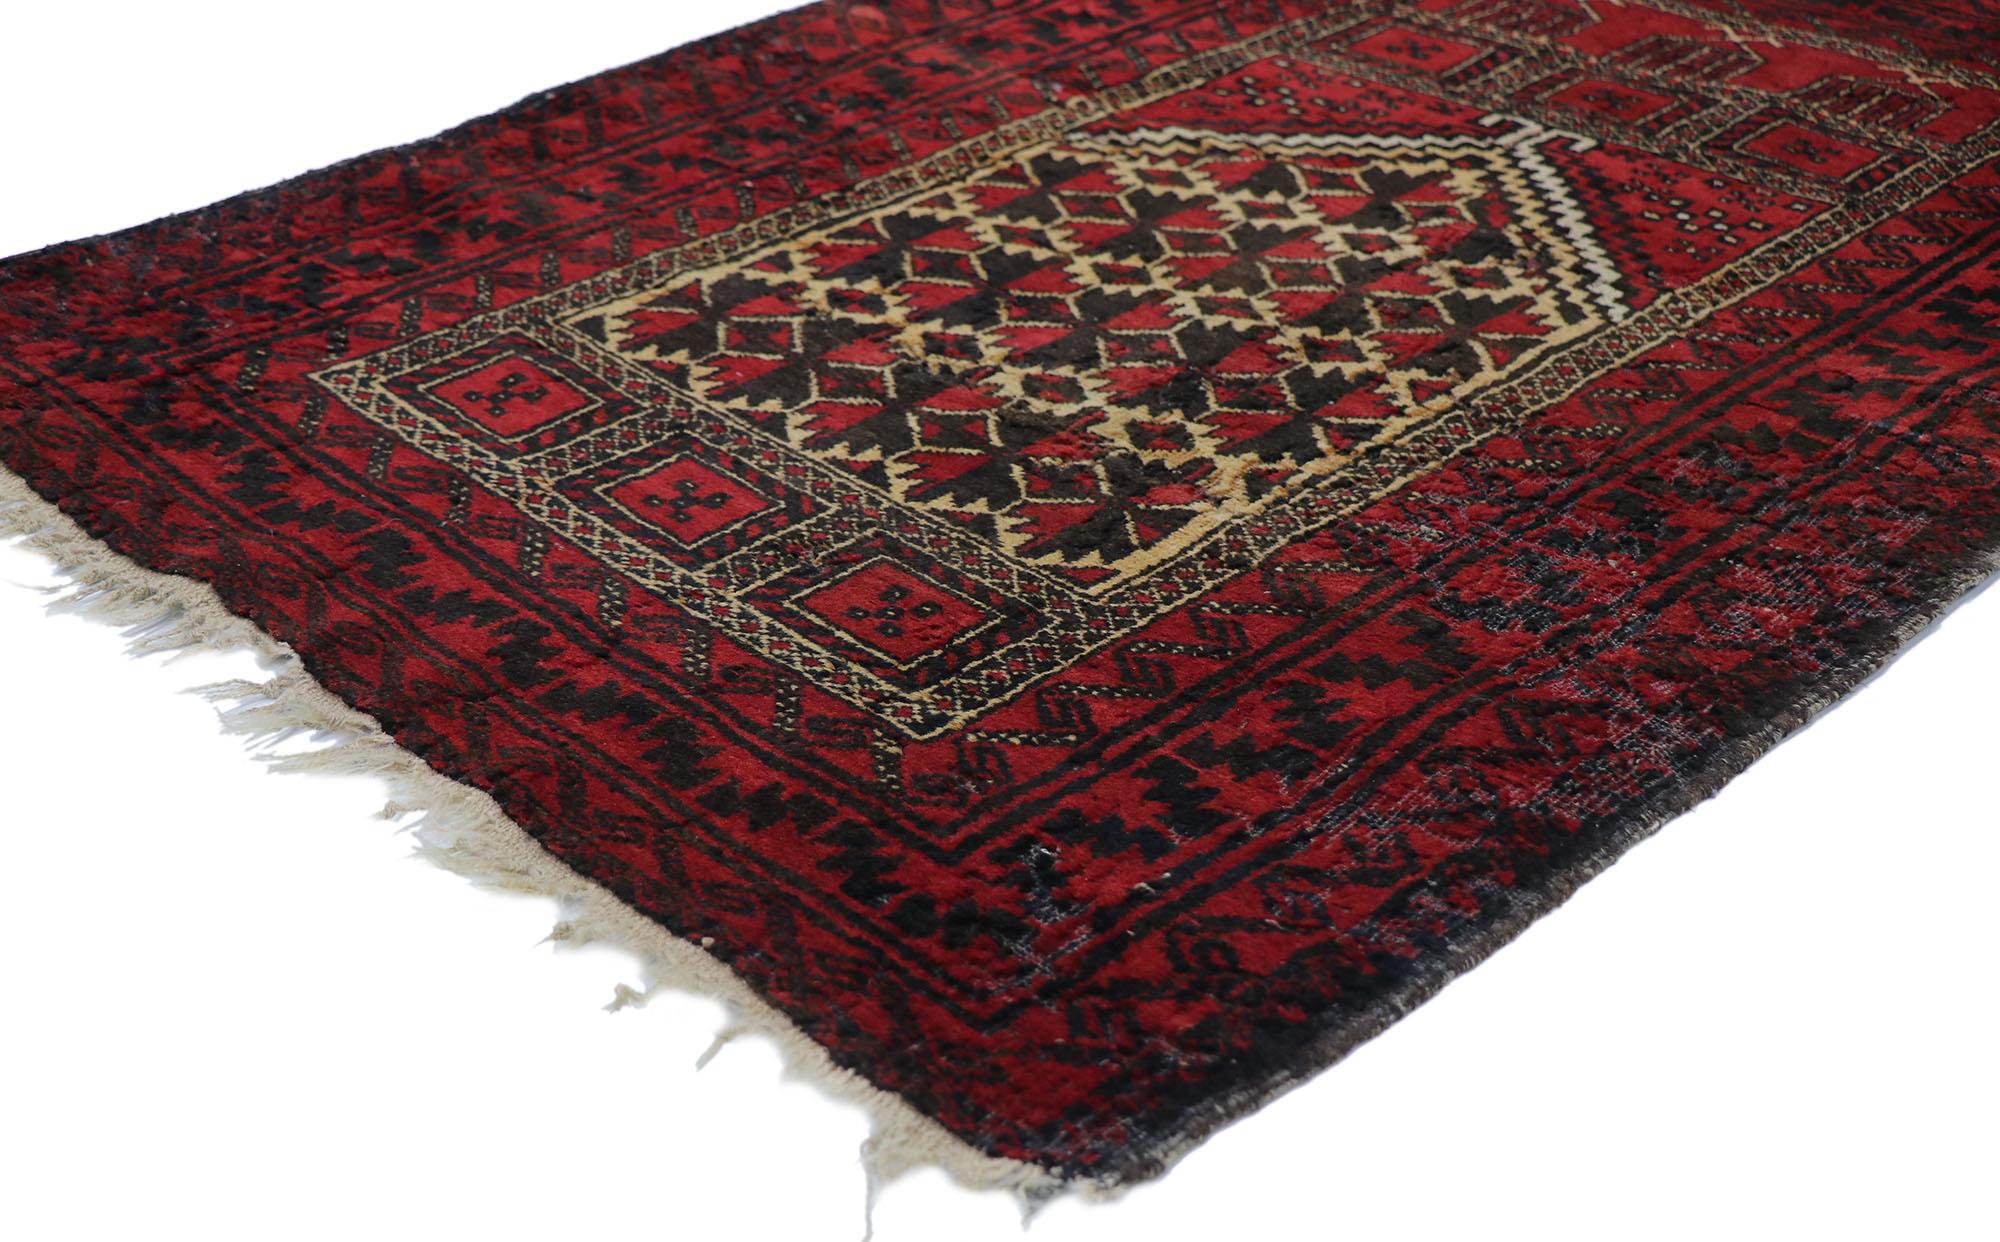 77785 Distressed Vintage Herat Persian Baluch Prayer rug 03'00 x 04'00. With warm hues and rugged beauty, this hand knotted wool distressed vintage Persian Baluch prayer rug beautifully embodies rustic tribal style. It features a stepped mihrab